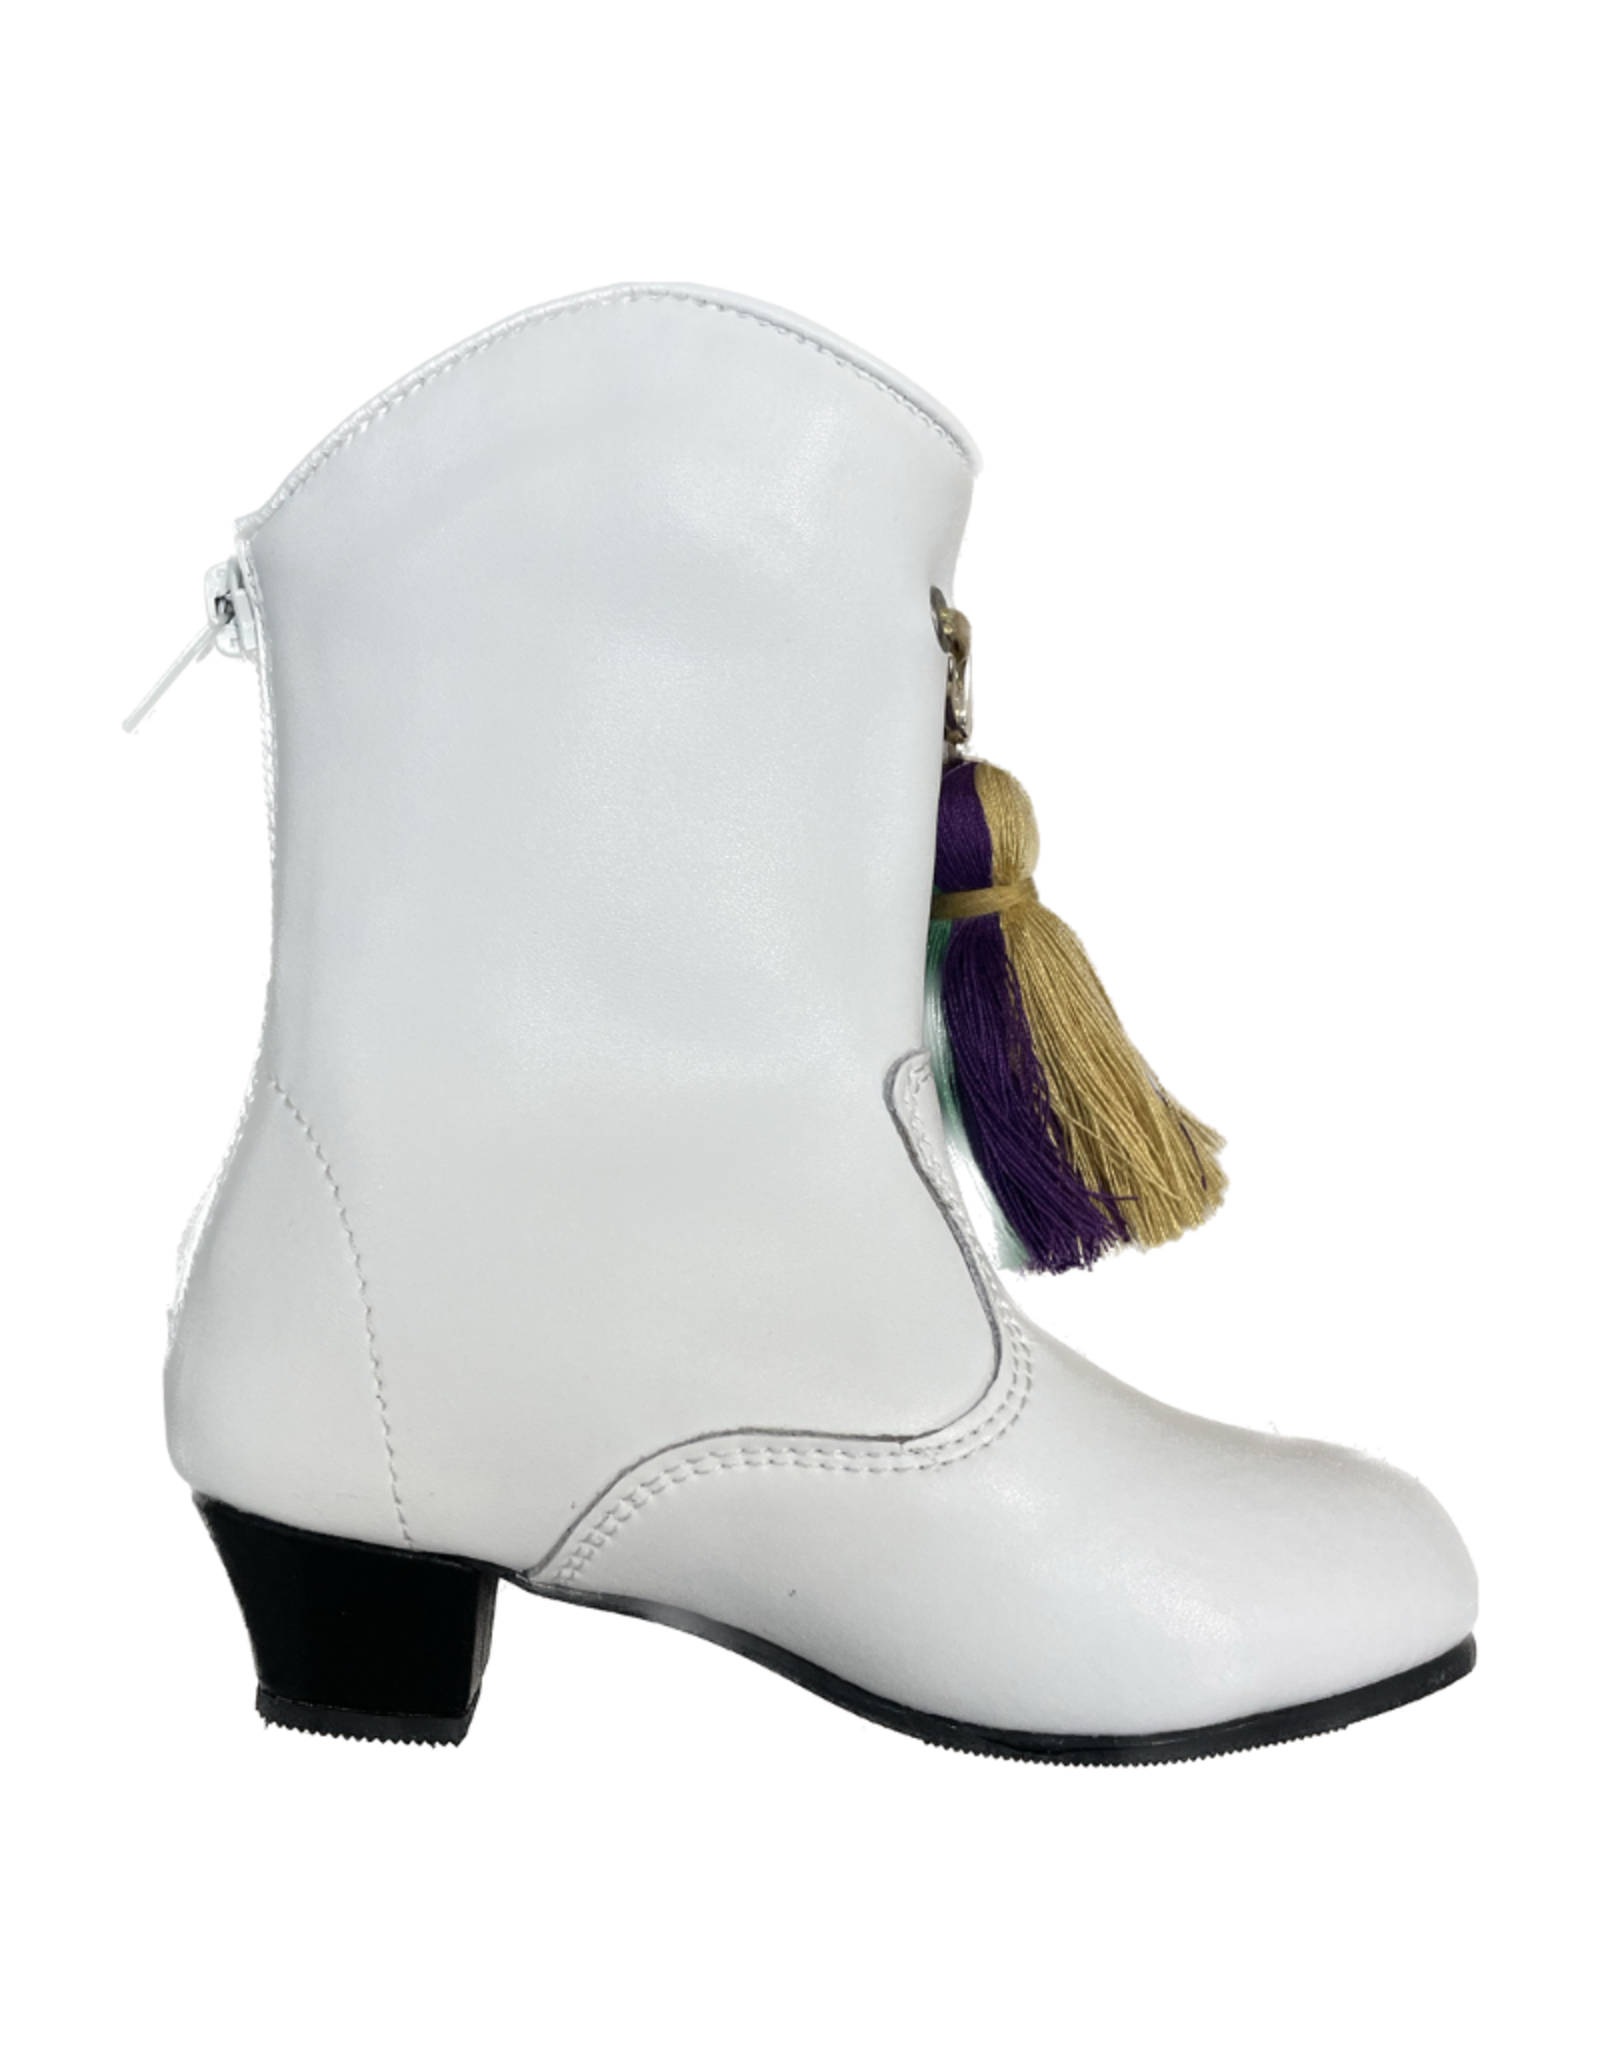 Youth Mardi Gras Marching Boots